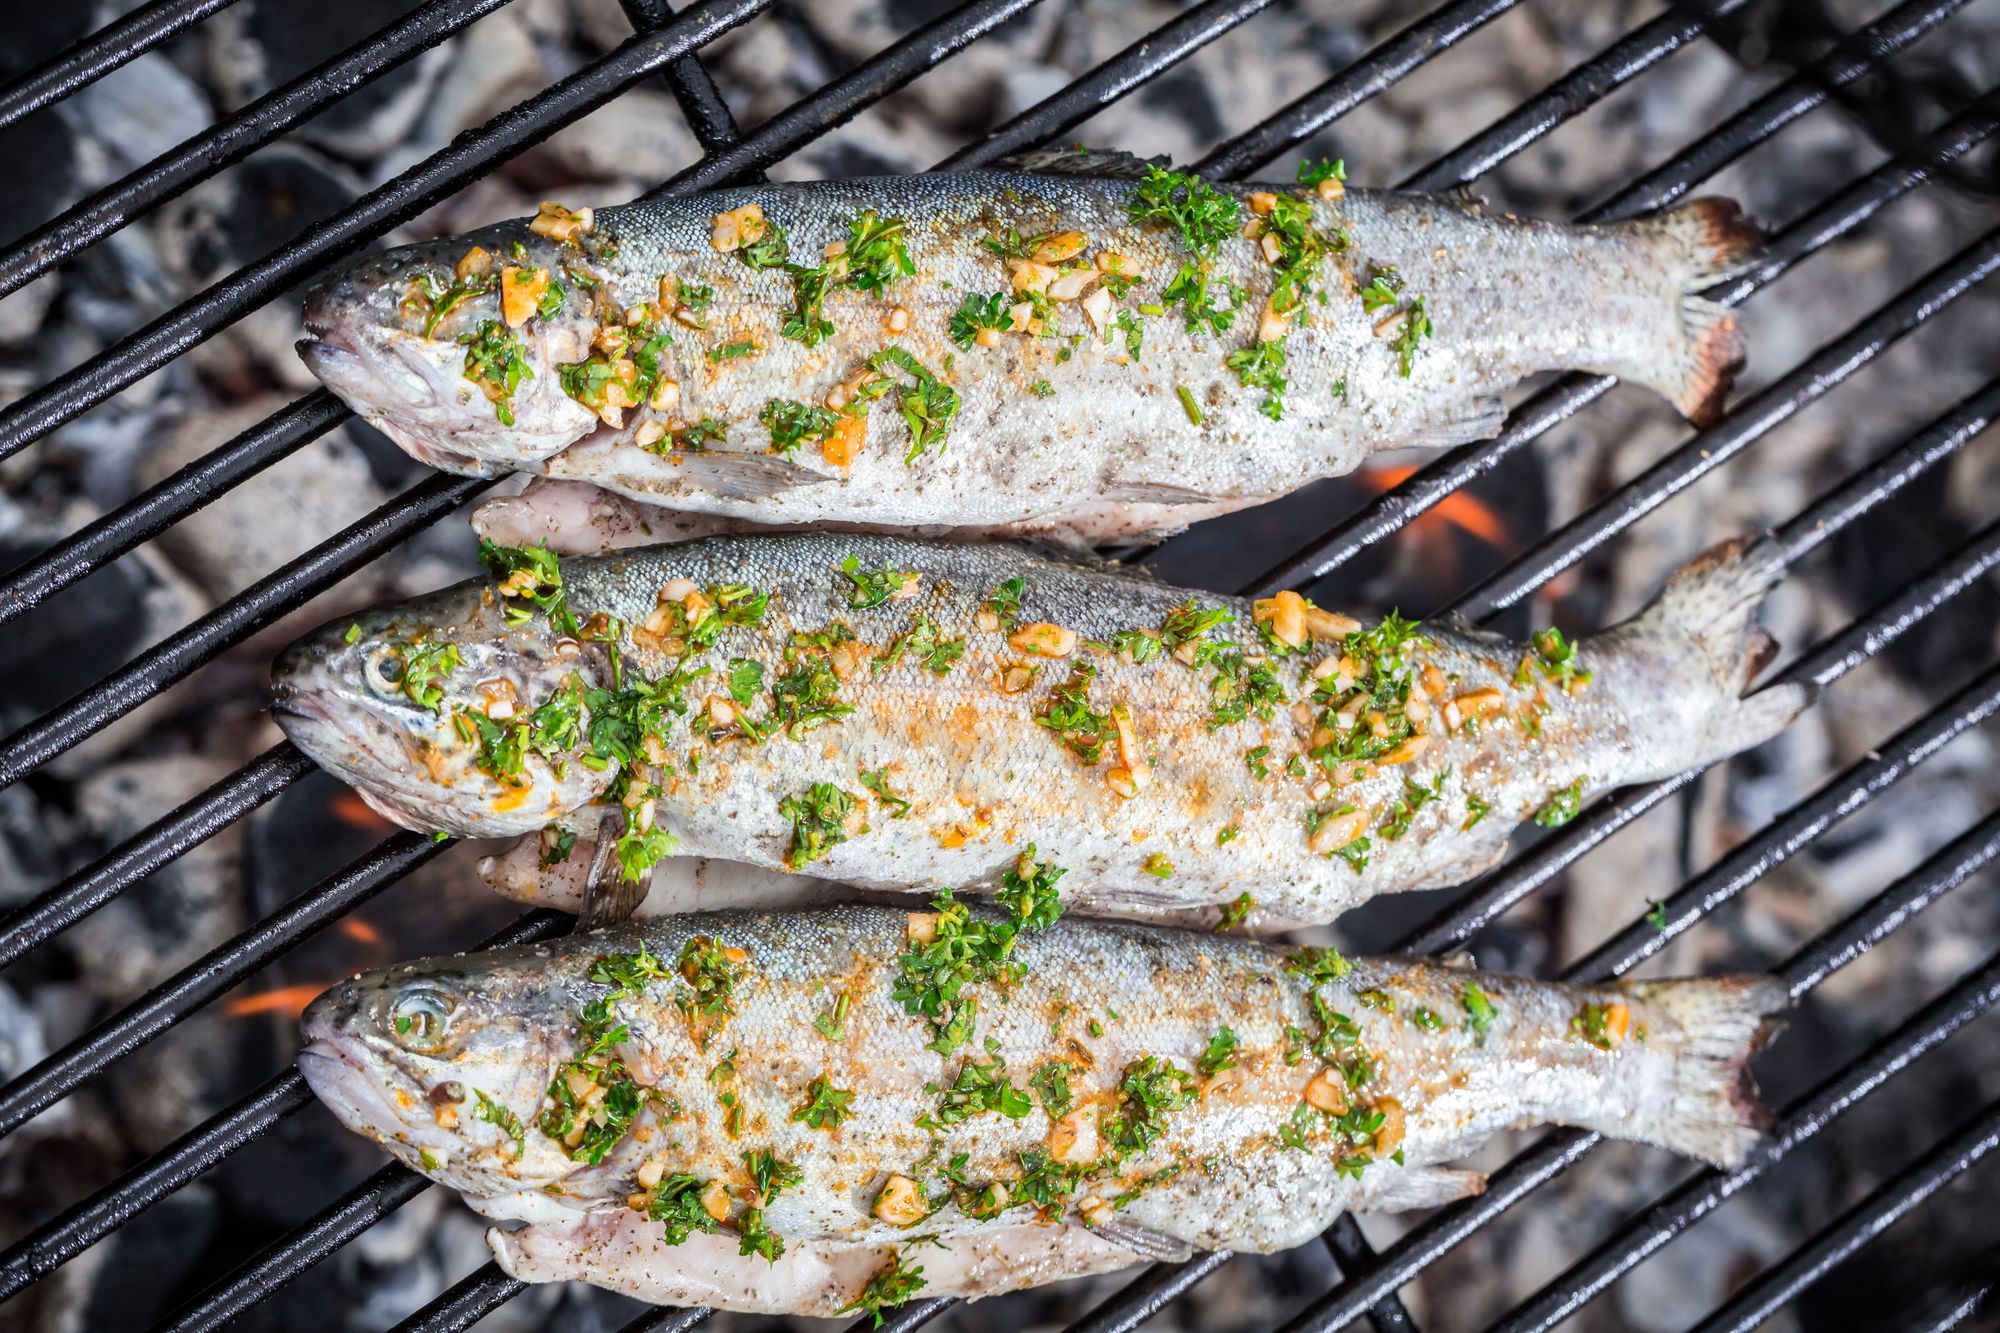 Fennel and Herb Barbecued Snapper